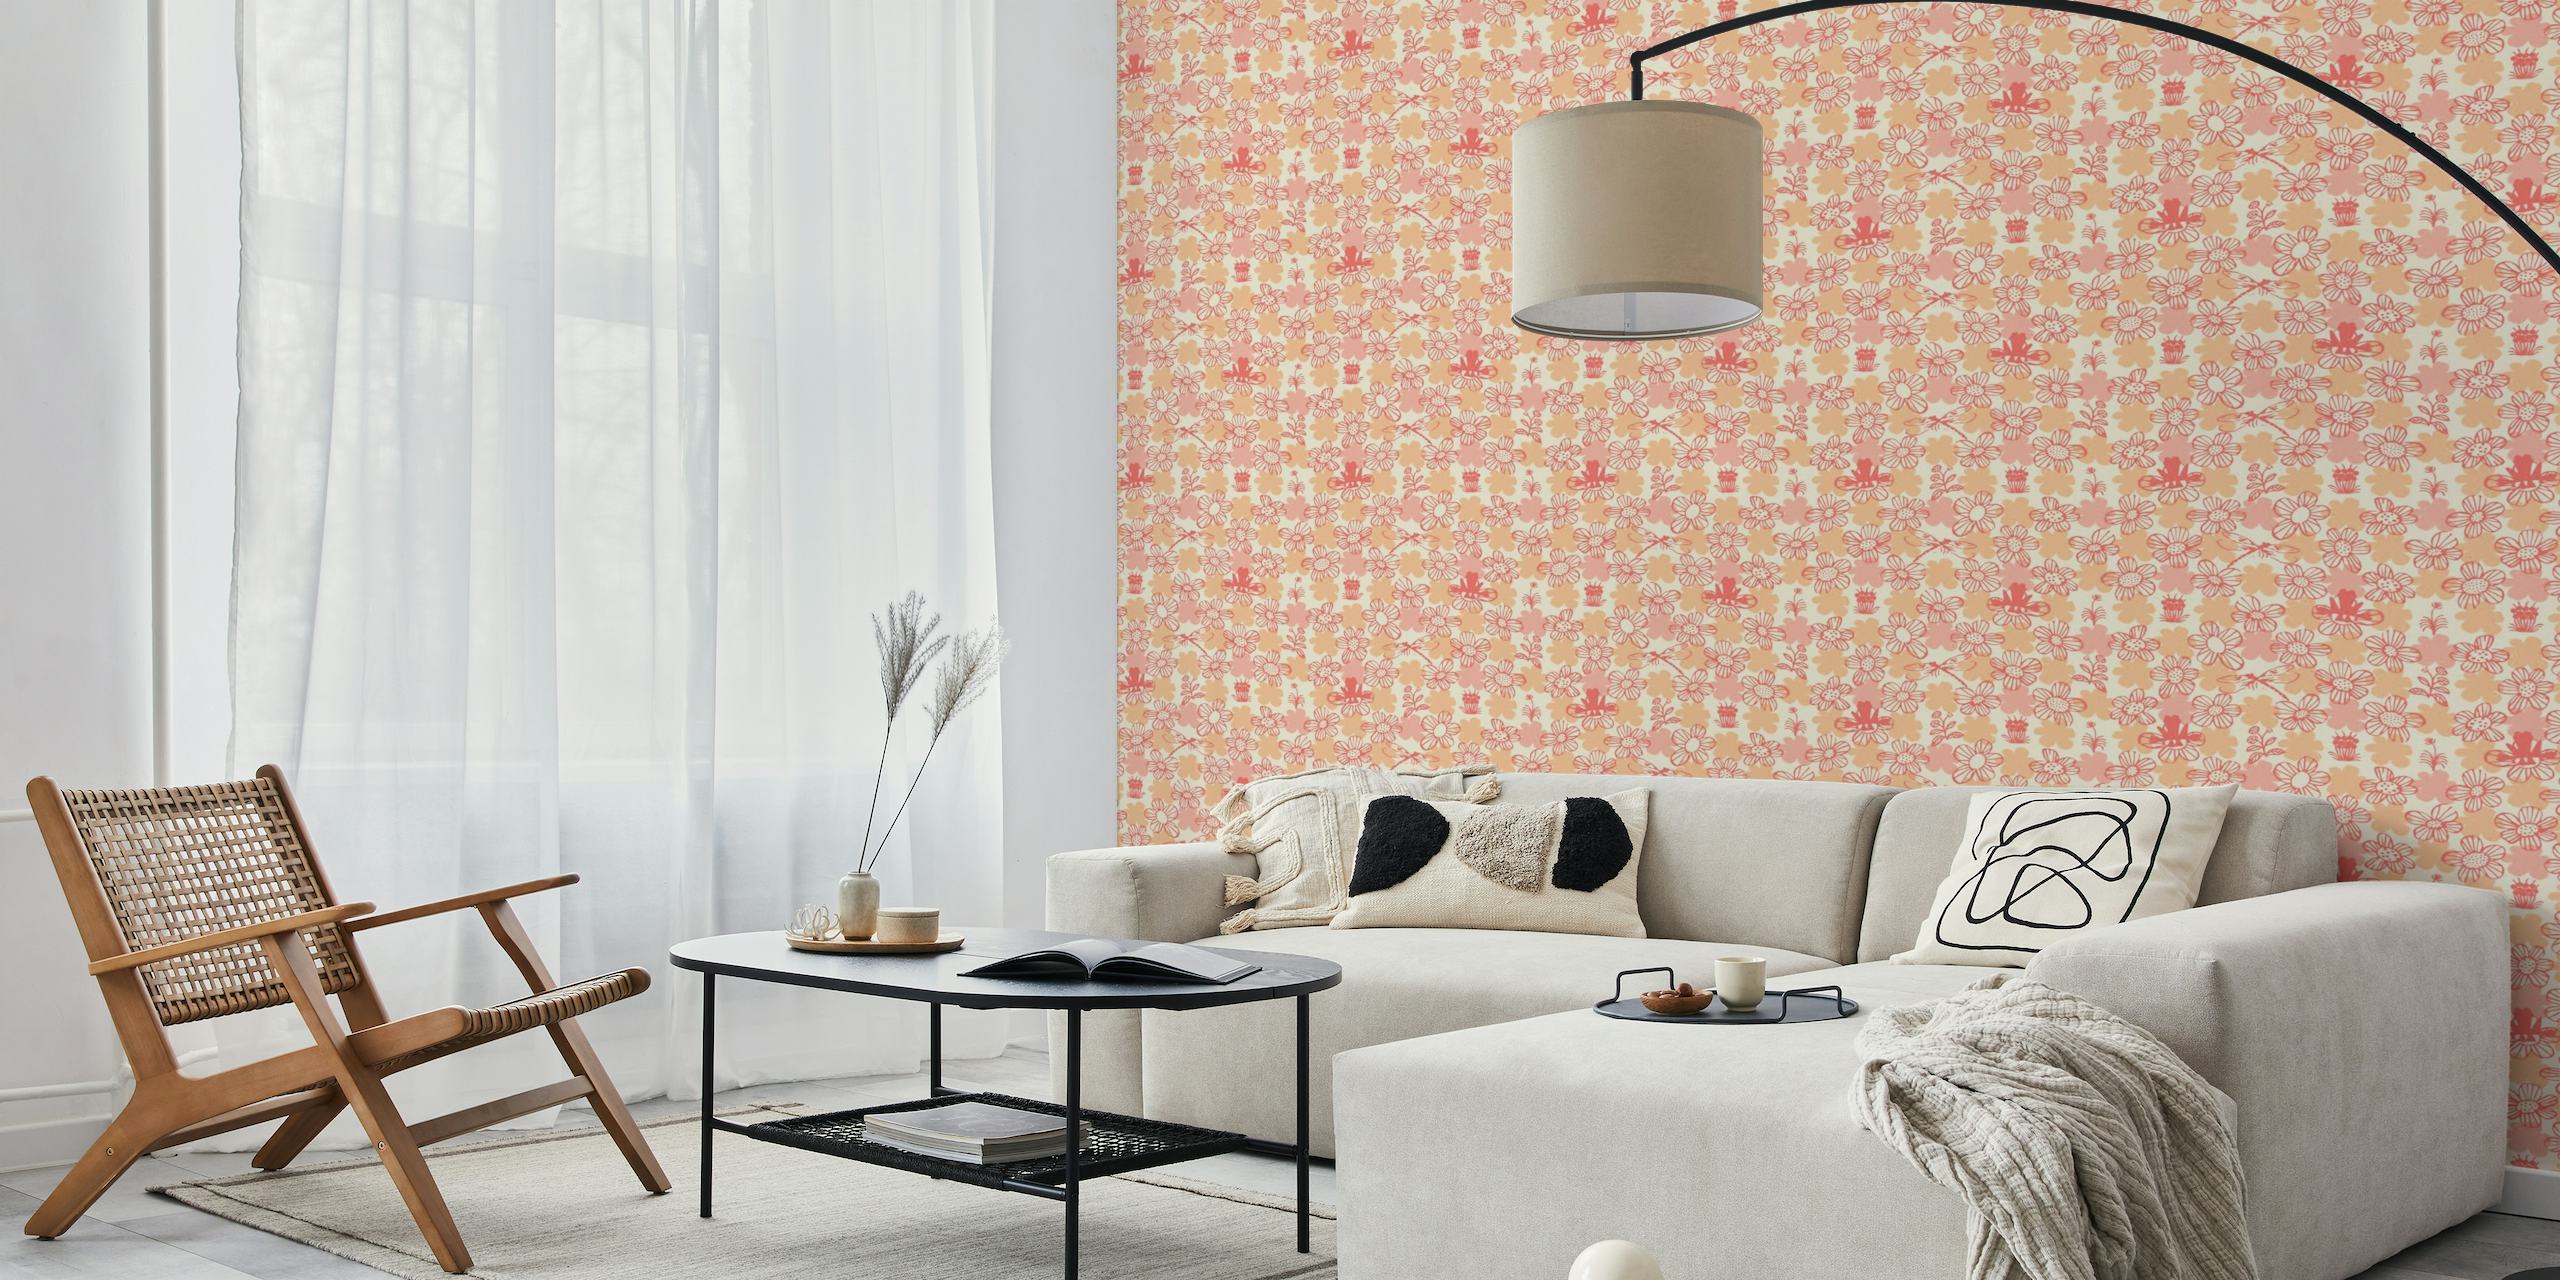 Scandinavian-style floral wall mural in peach and blush tones